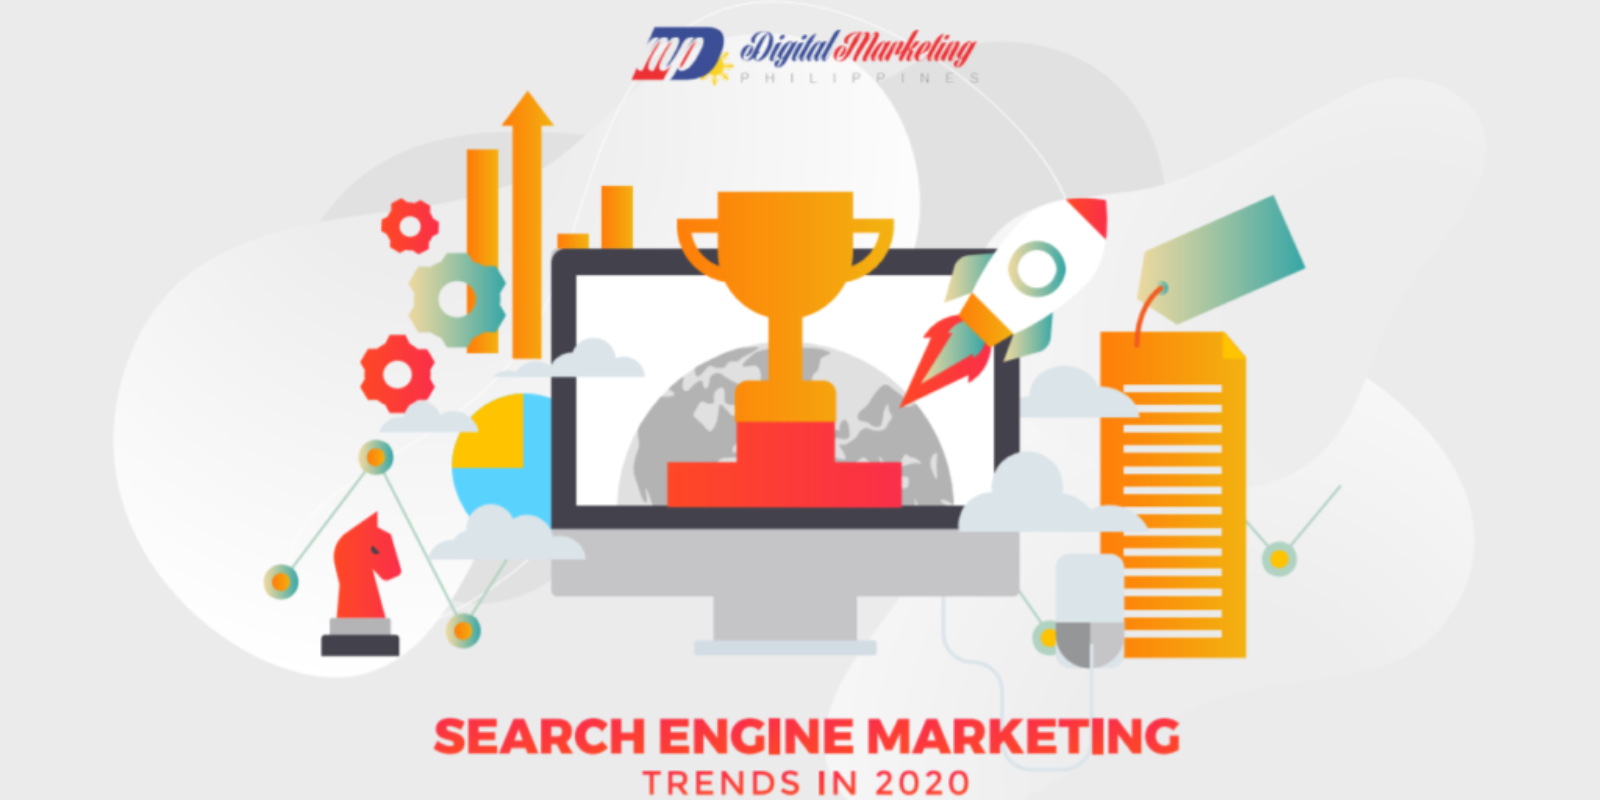 Search Engine Marketing Trends in 2020